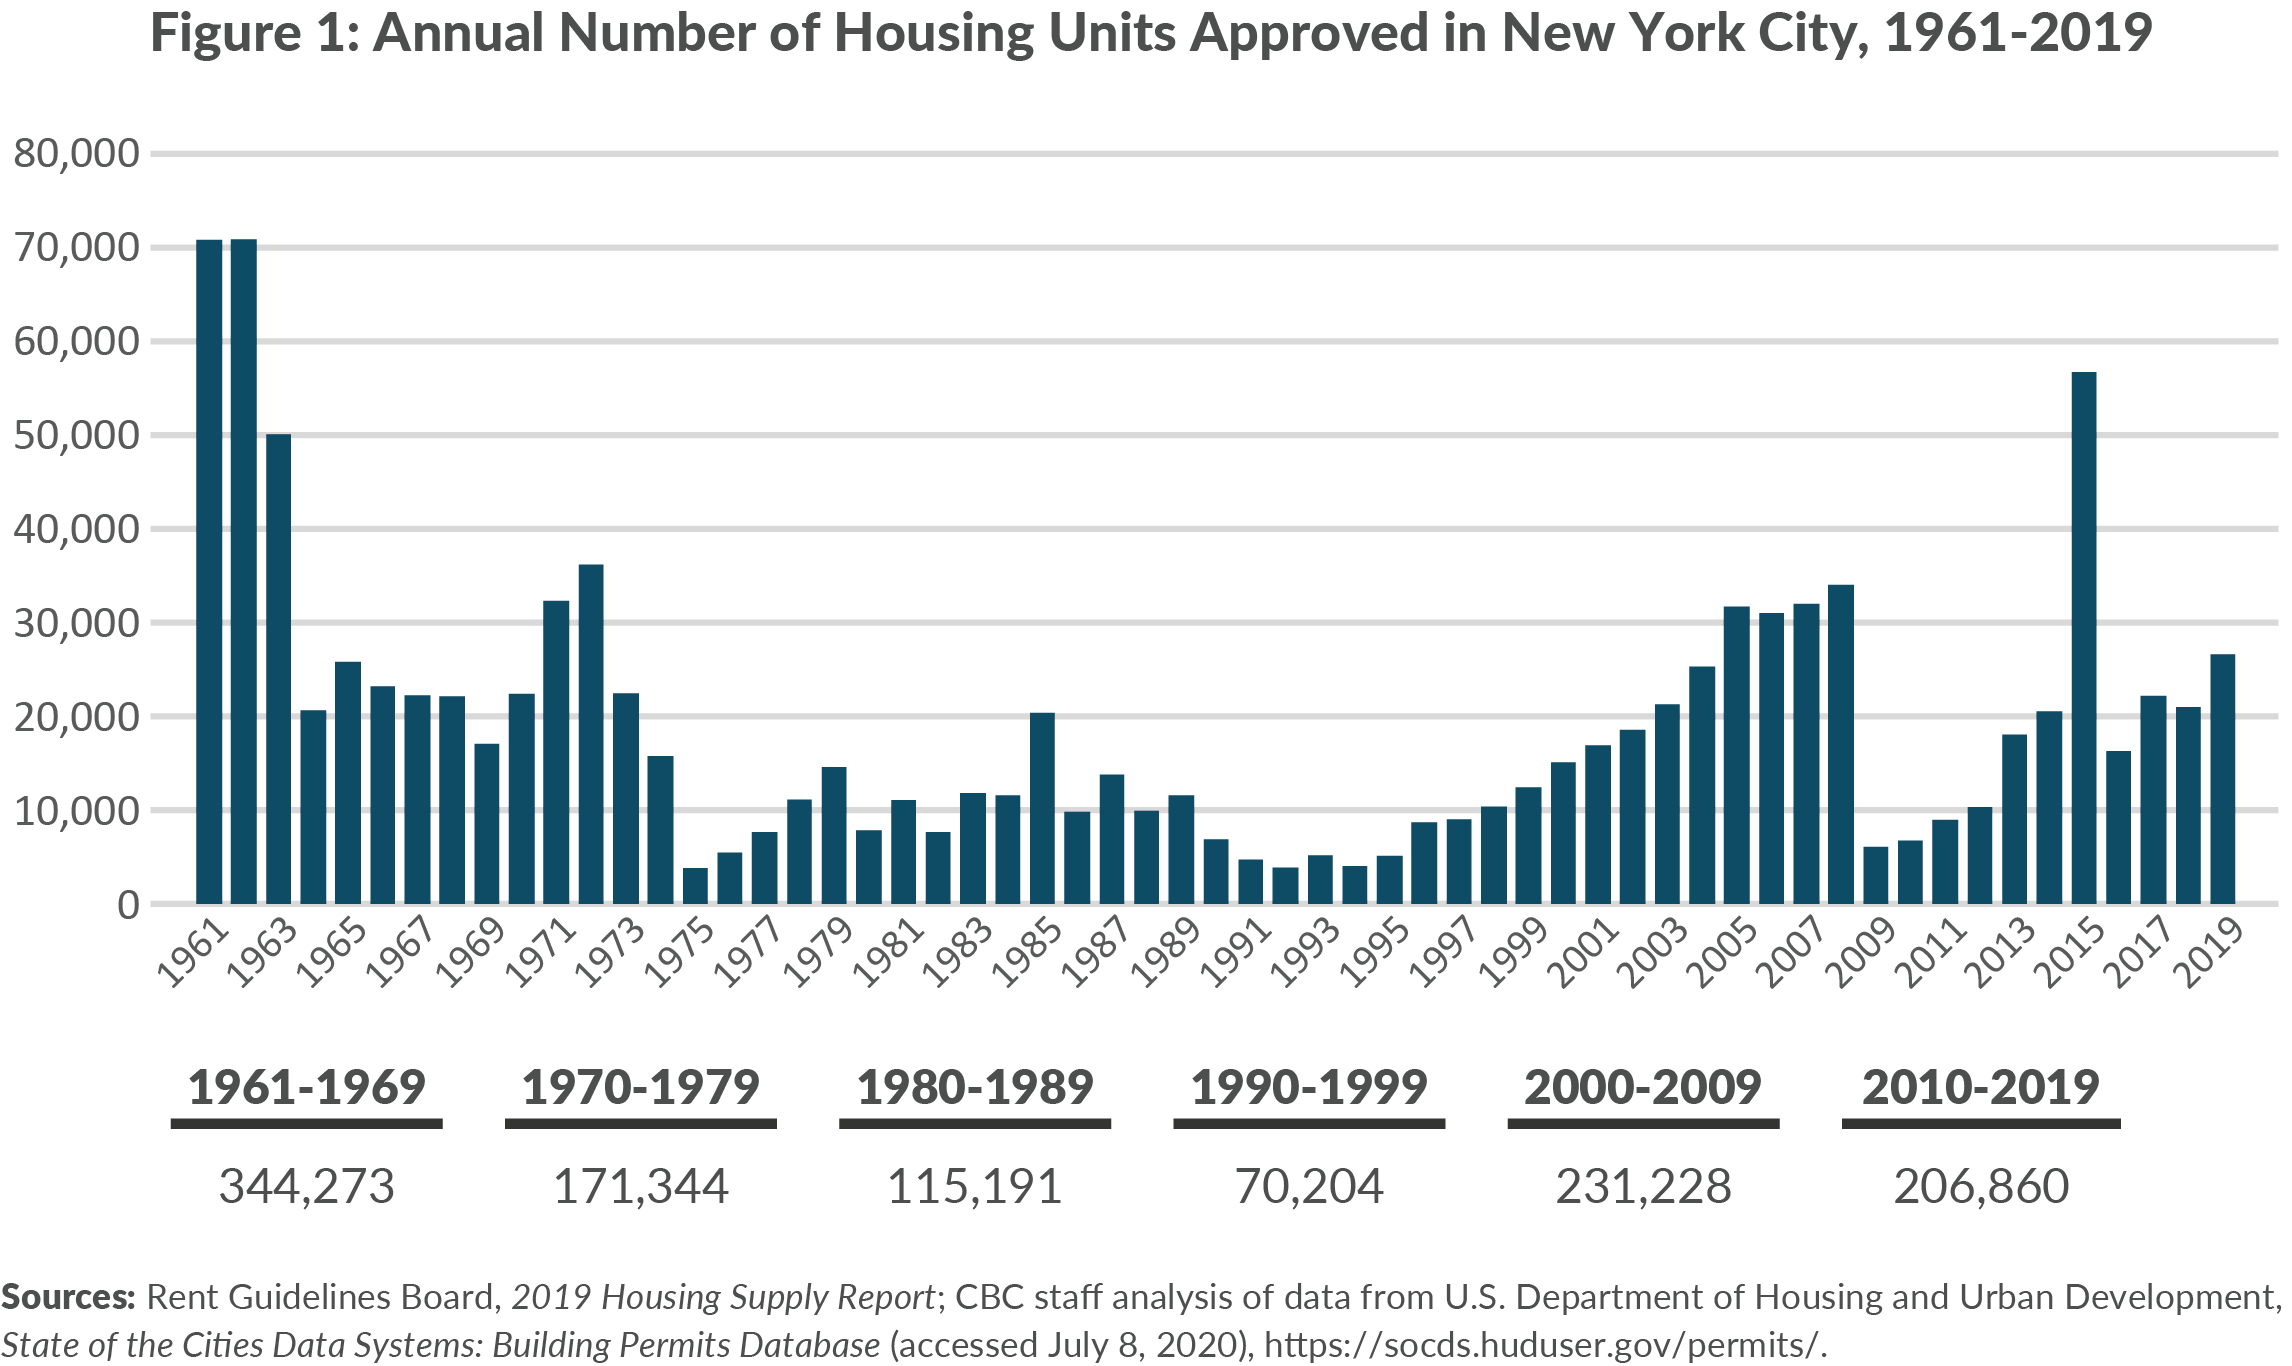 Figure 1. Annual Number of Units Issued in New York City, 1961 to 2019